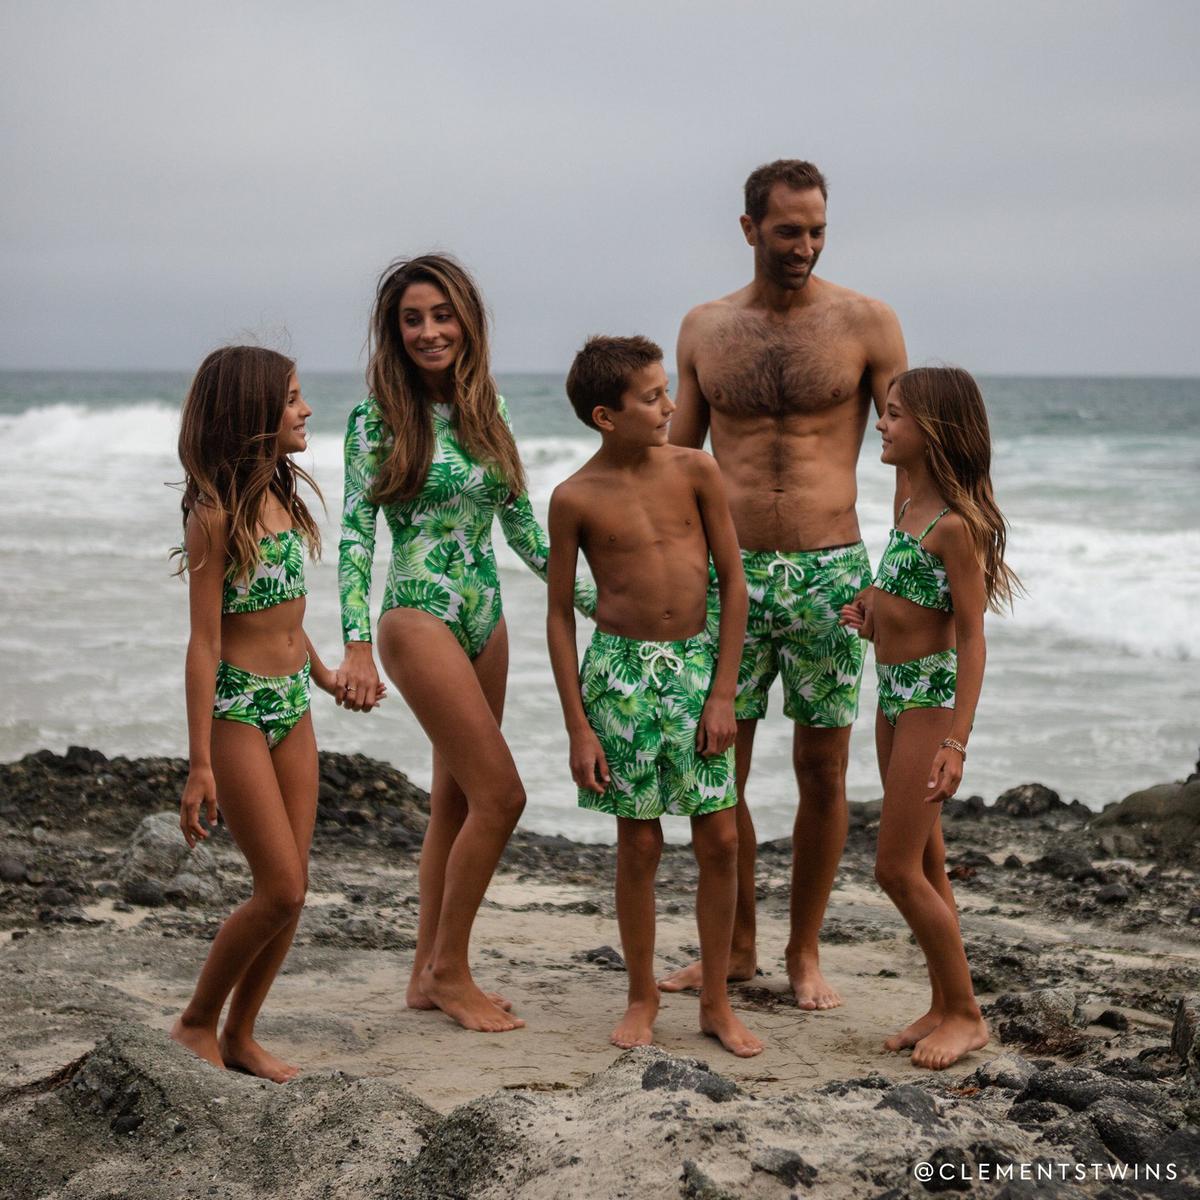 Sara Foster Partners With Summersalt for Family Swimwear